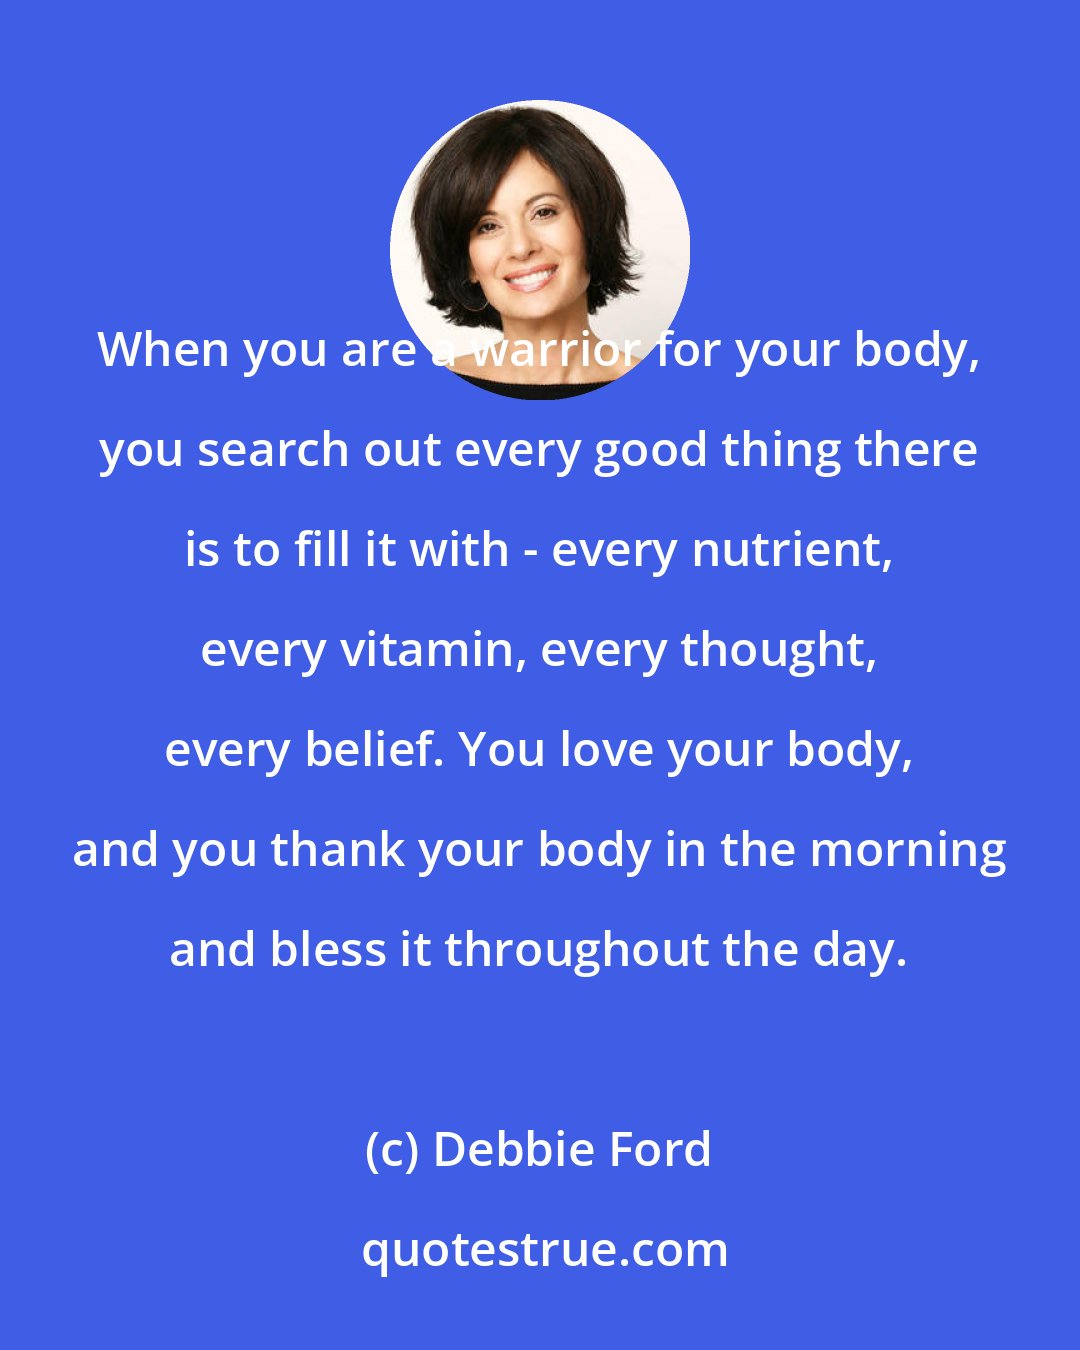 Debbie Ford: When you are a warrior for your body, you search out every good thing there is to fill it with - every nutrient, every vitamin, every thought, every belief. You love your body, and you thank your body in the morning and bless it throughout the day.